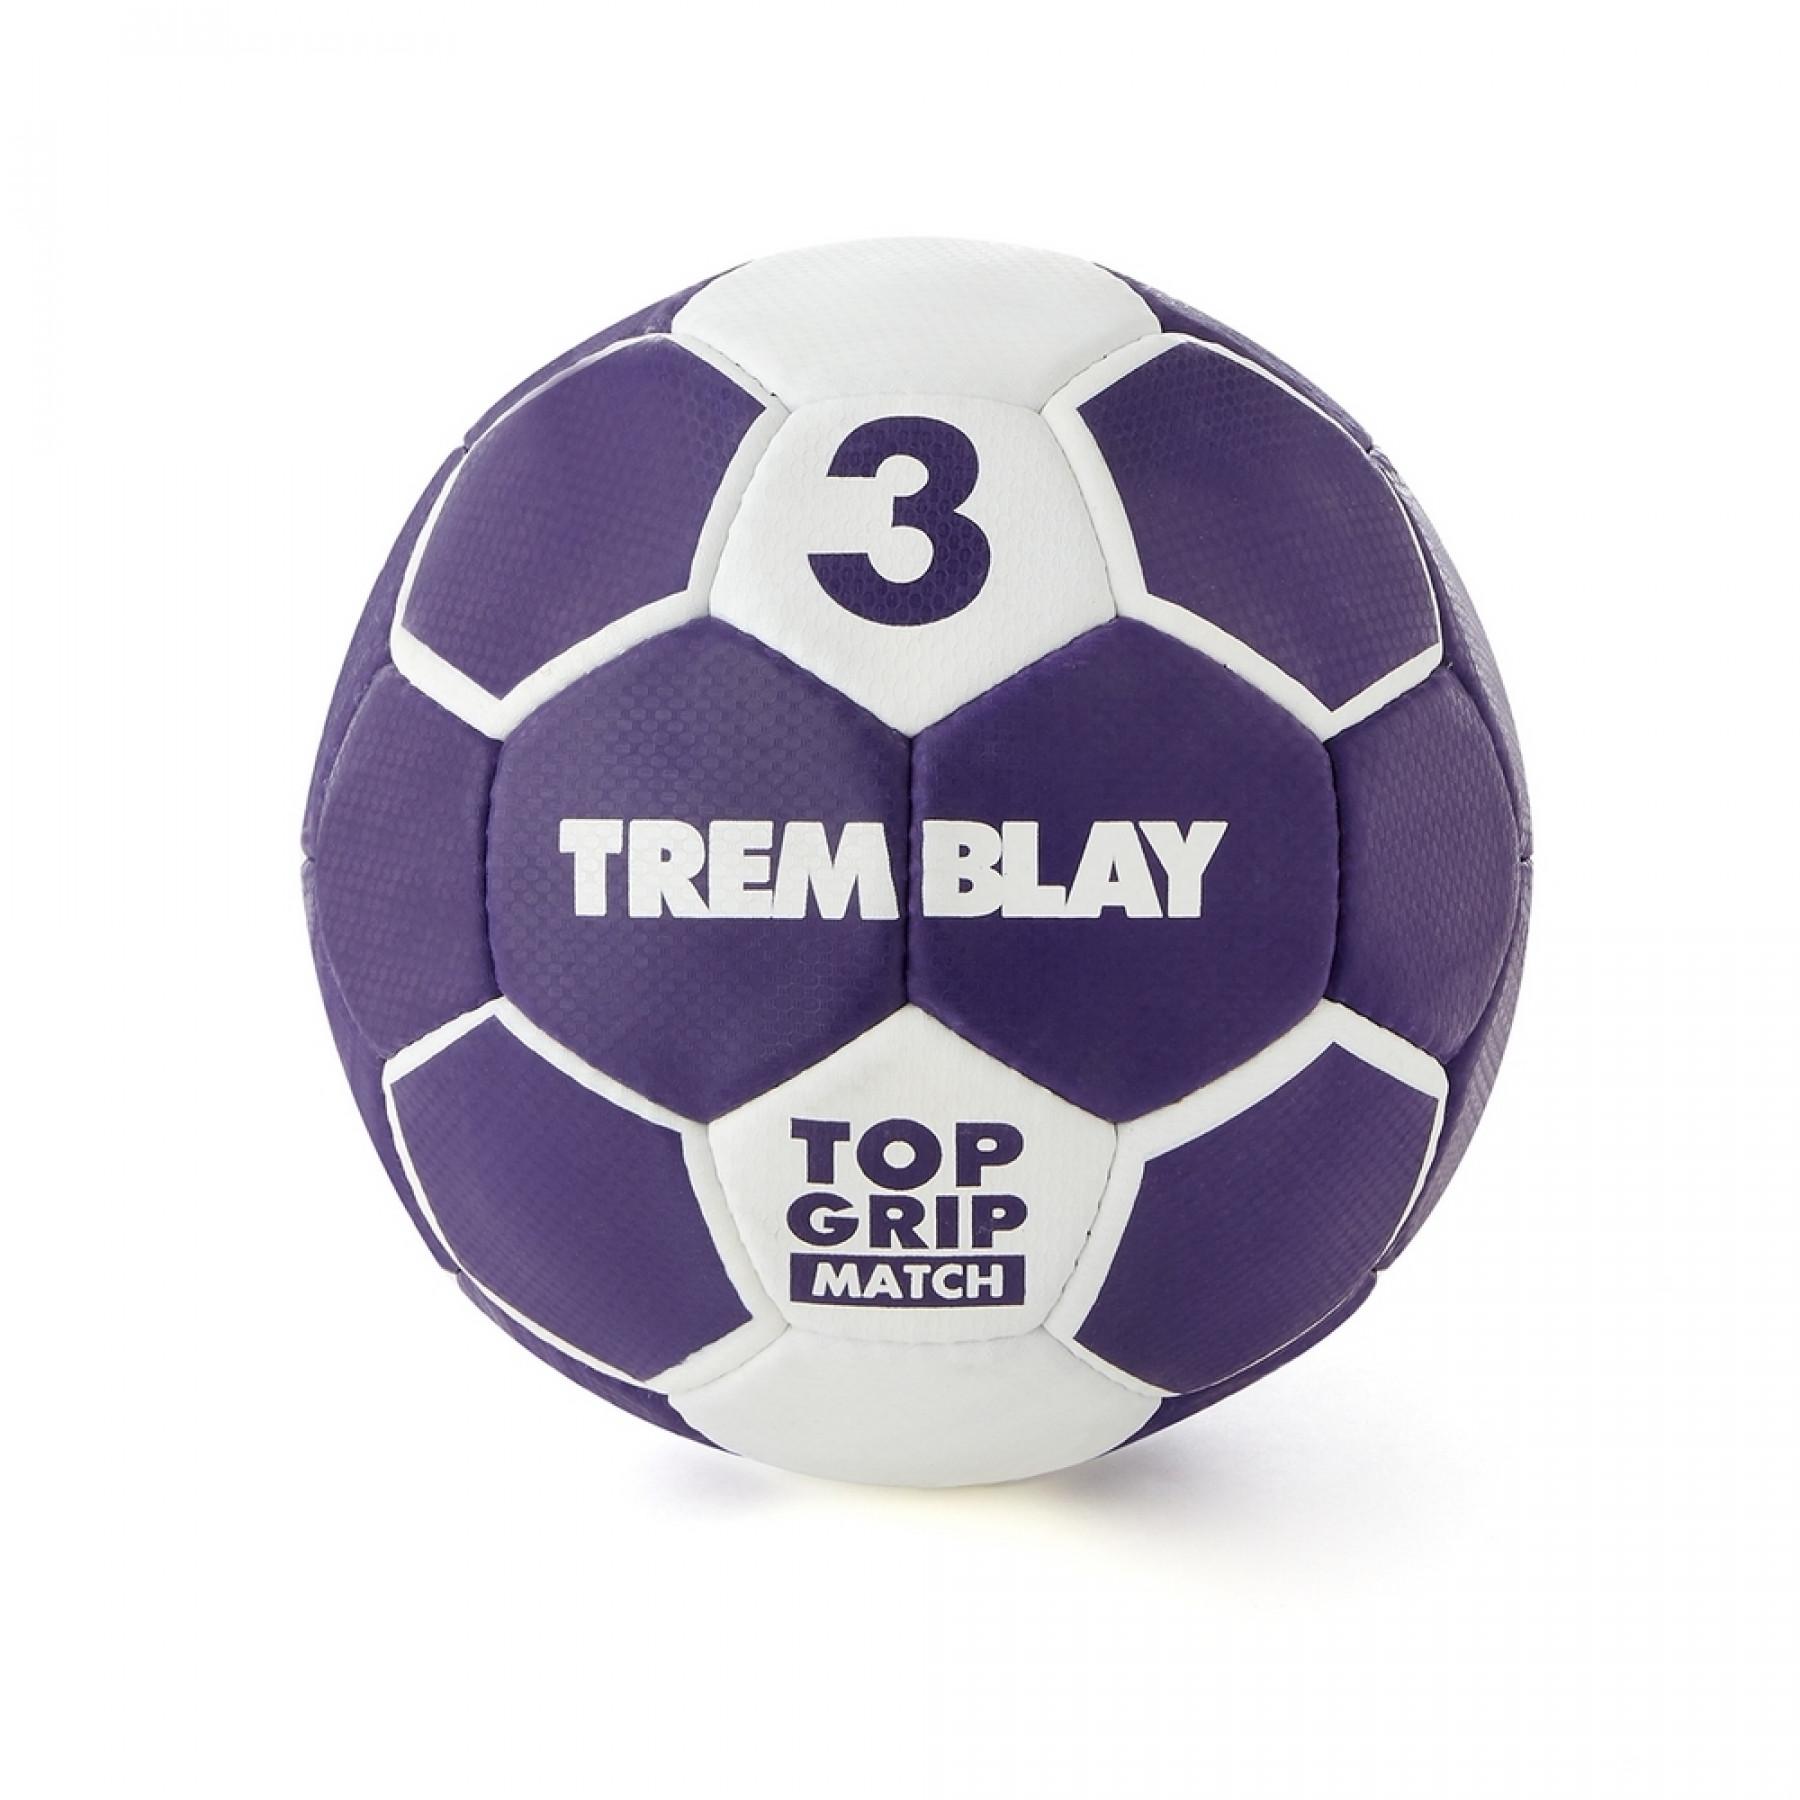 Ball tremblay top grid 2nd generation